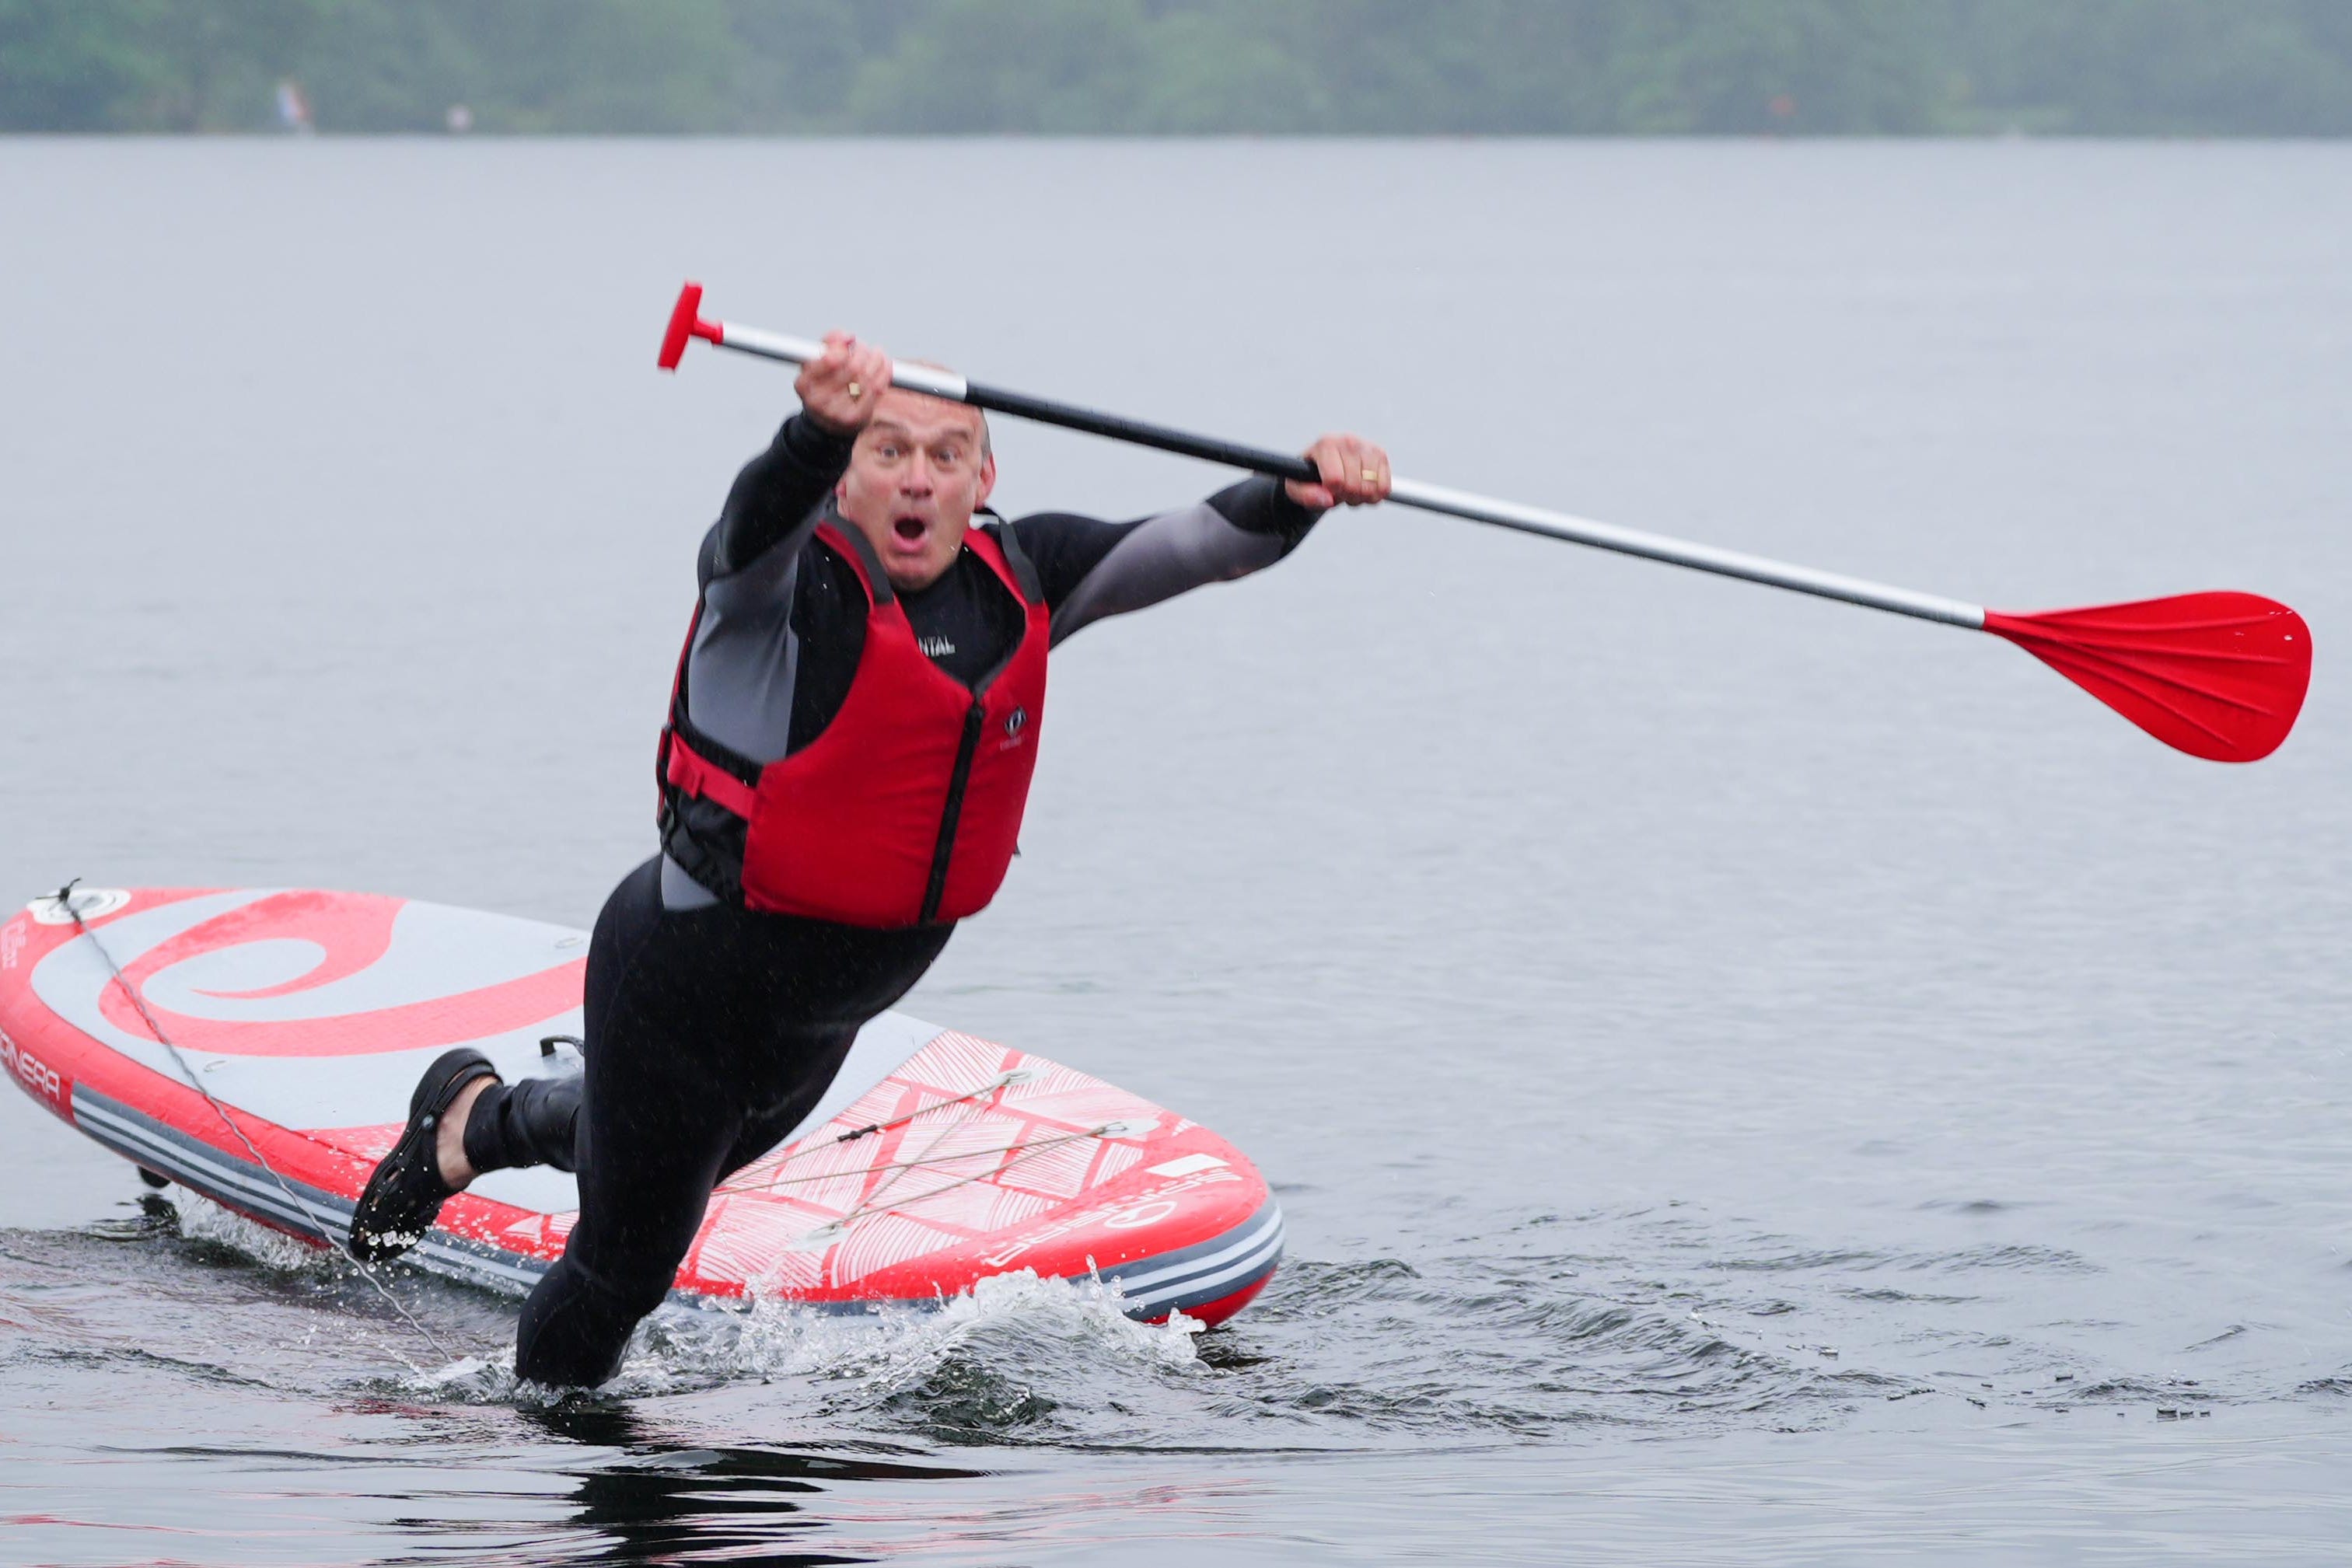 Liberal Democrat leader Sir Ed Davey falls in while paddleboarding on Windermere